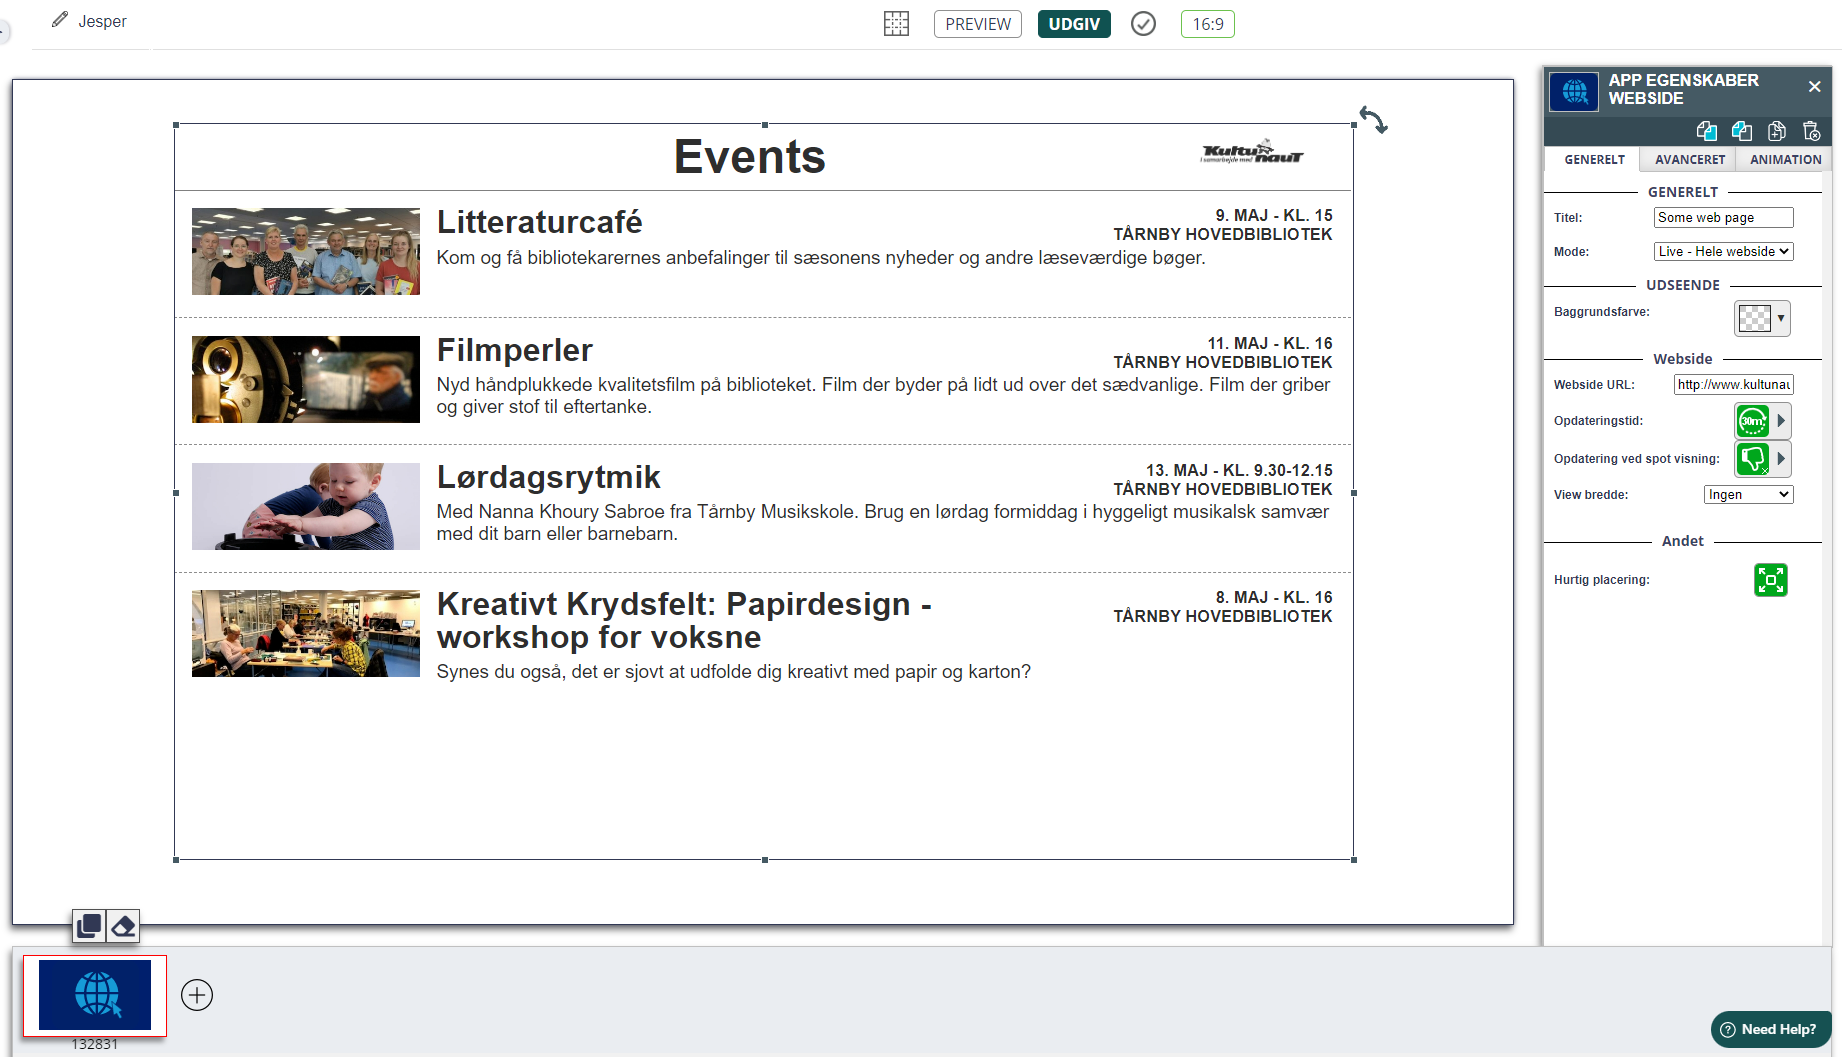 Content management system interface showing a preview of an 'Events' page with multiple event listings including a literature café and a creative paper design workshop.